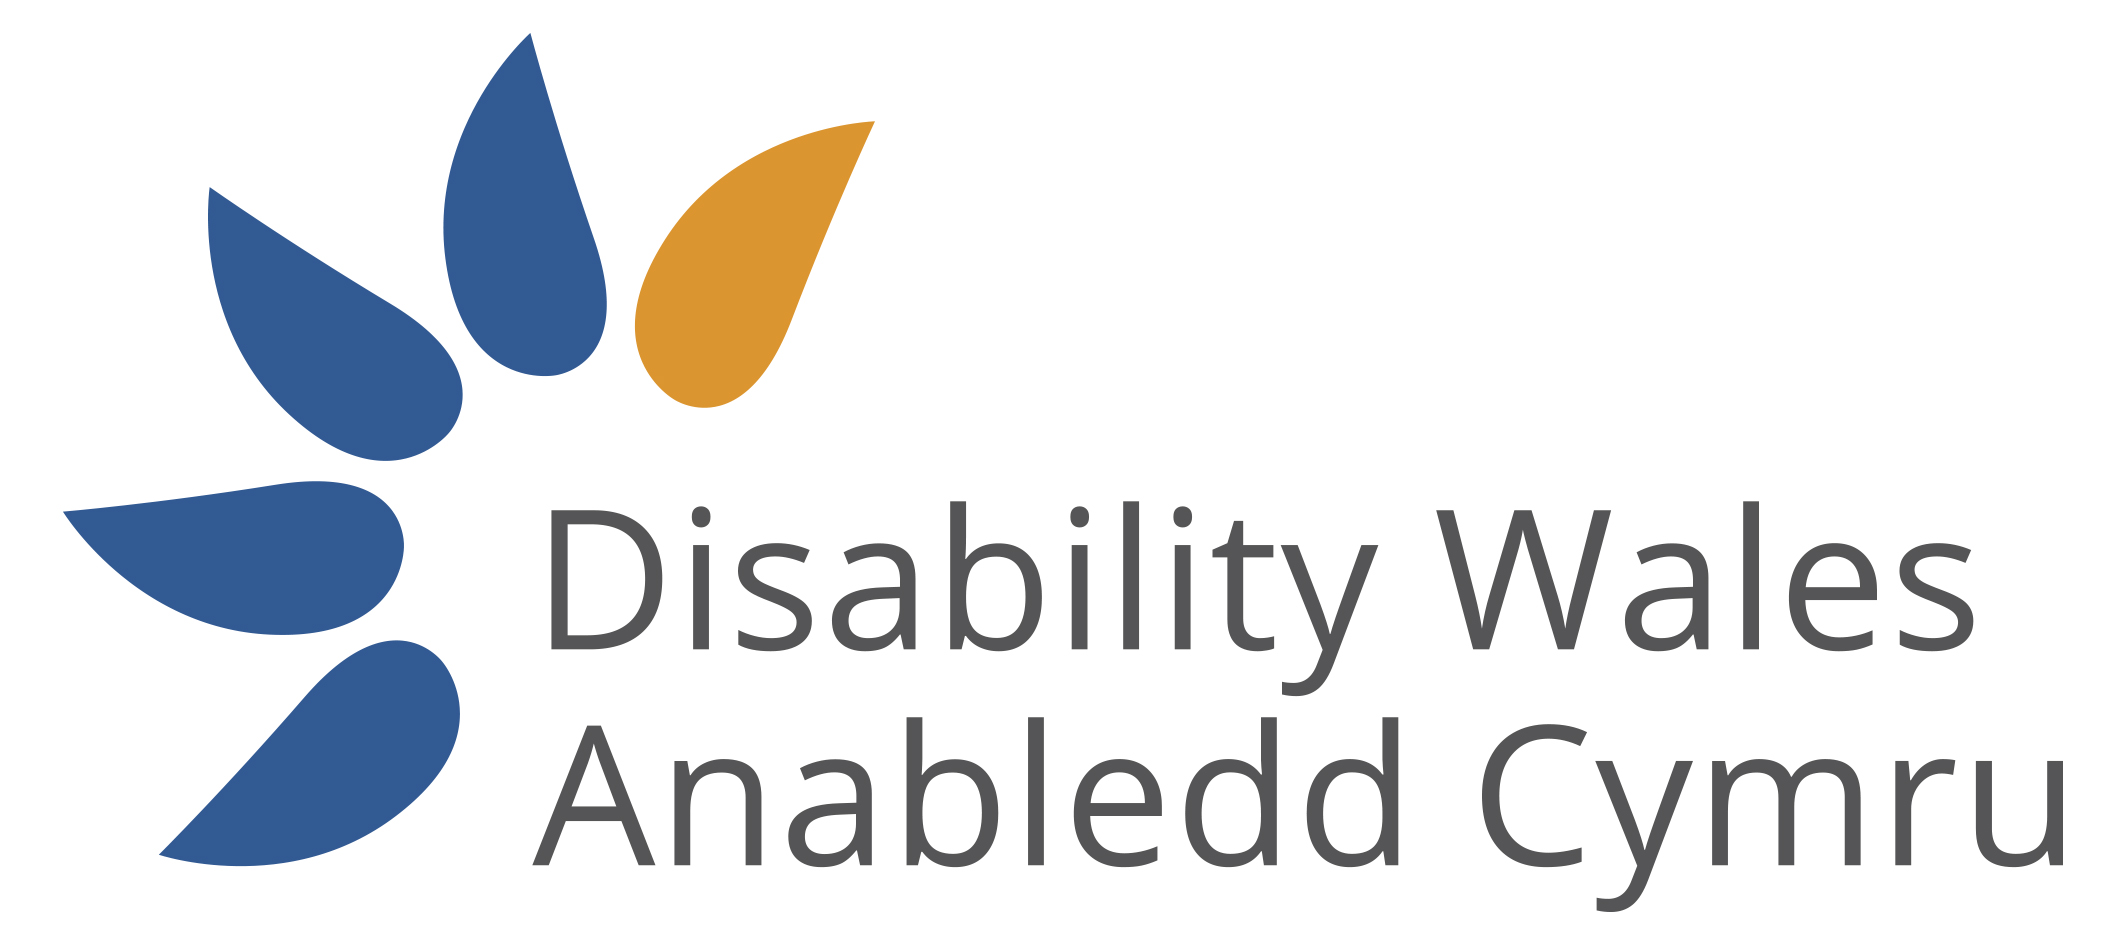 Disability Wales logo which has the organisation name in English and Welsh in plain text on a white background. The words are framed on the left hand side by four spirals in DW's trademark blue and orange colours.